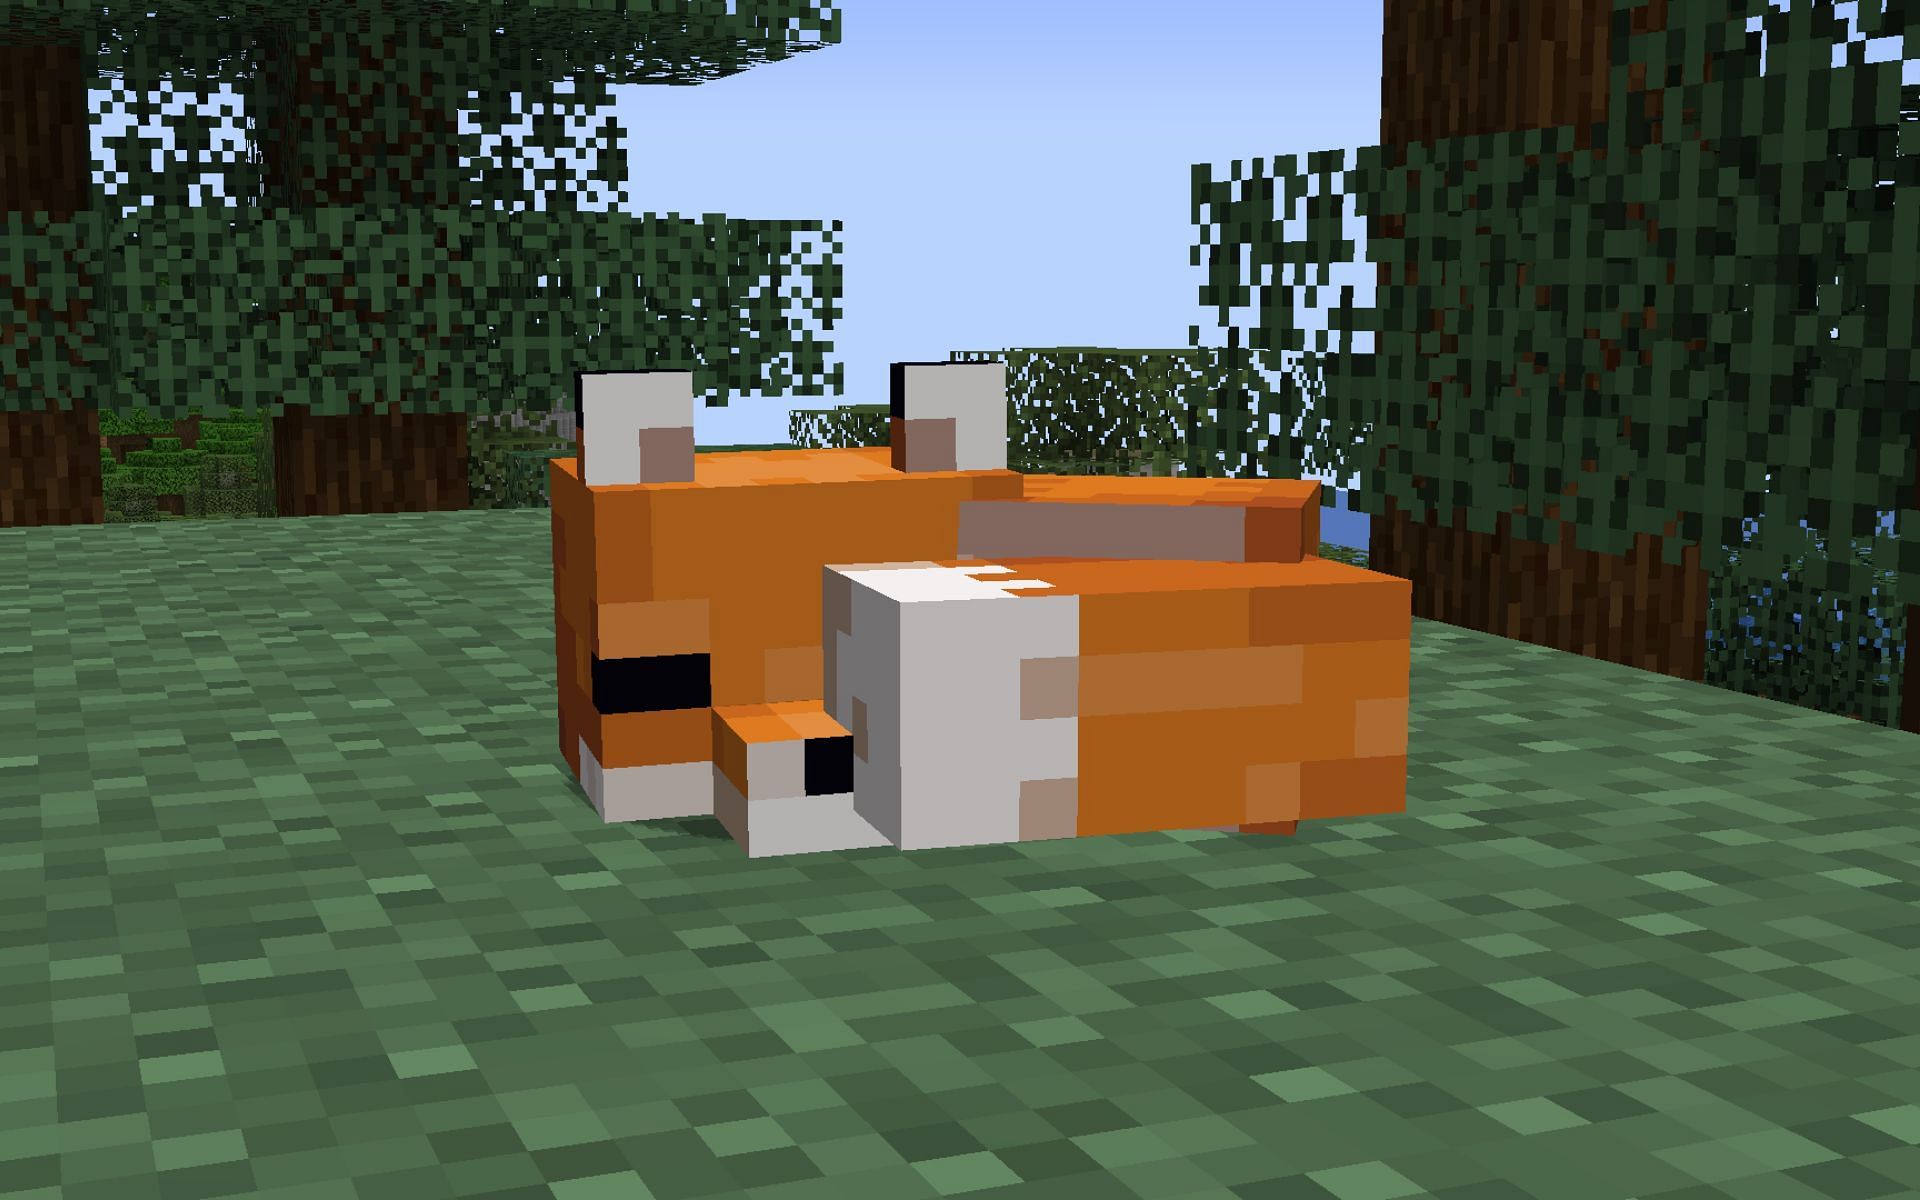 Foxes may also be bred by using the Glow Berries (Image via Mojang)